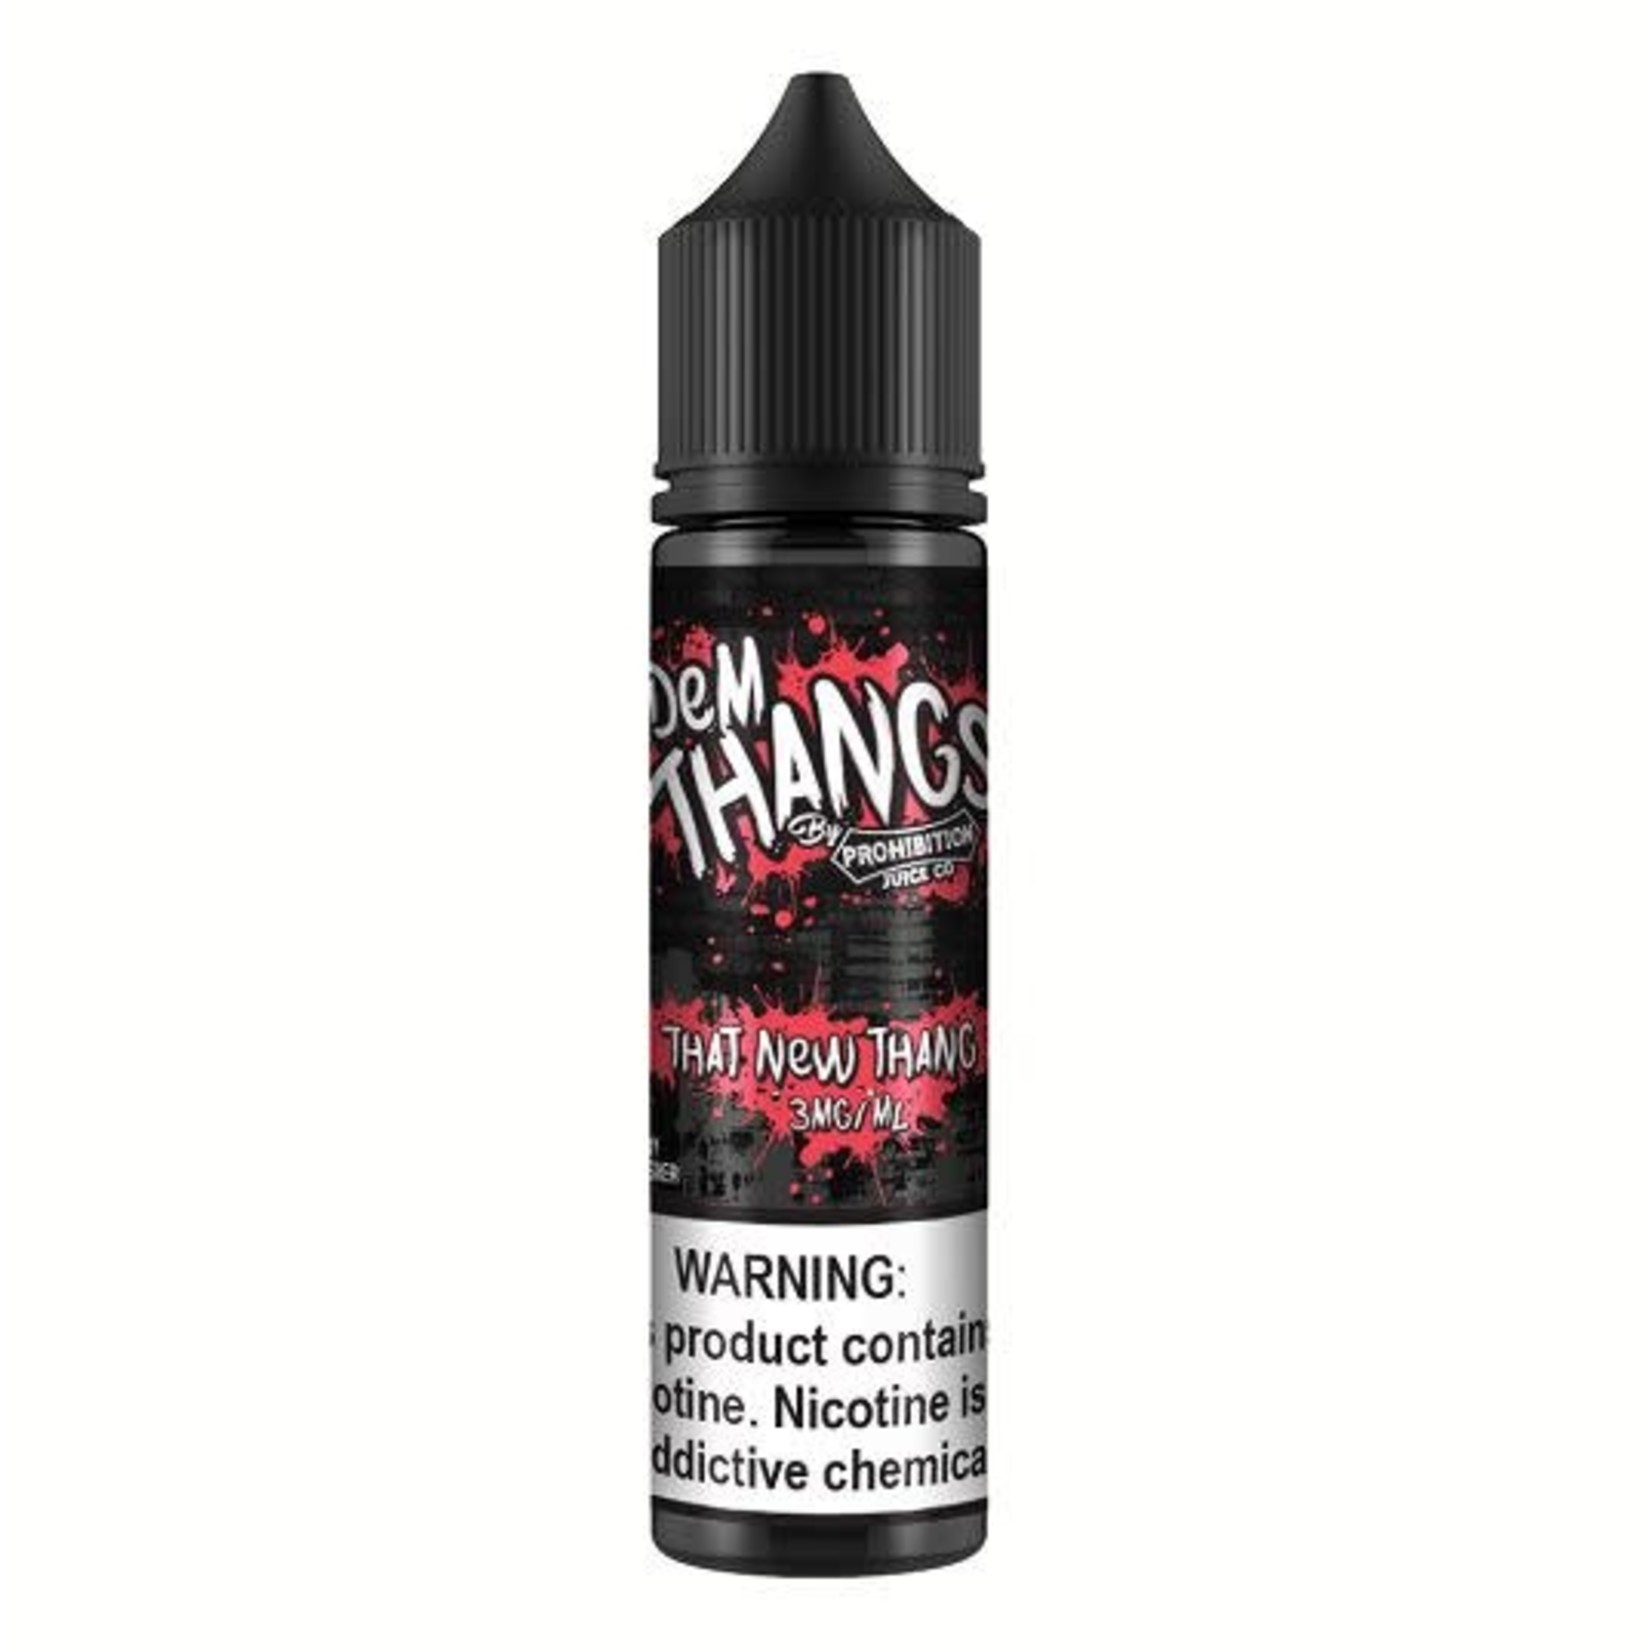 Prohibition Juice Co. Dem Thangs That New Thang 60ml